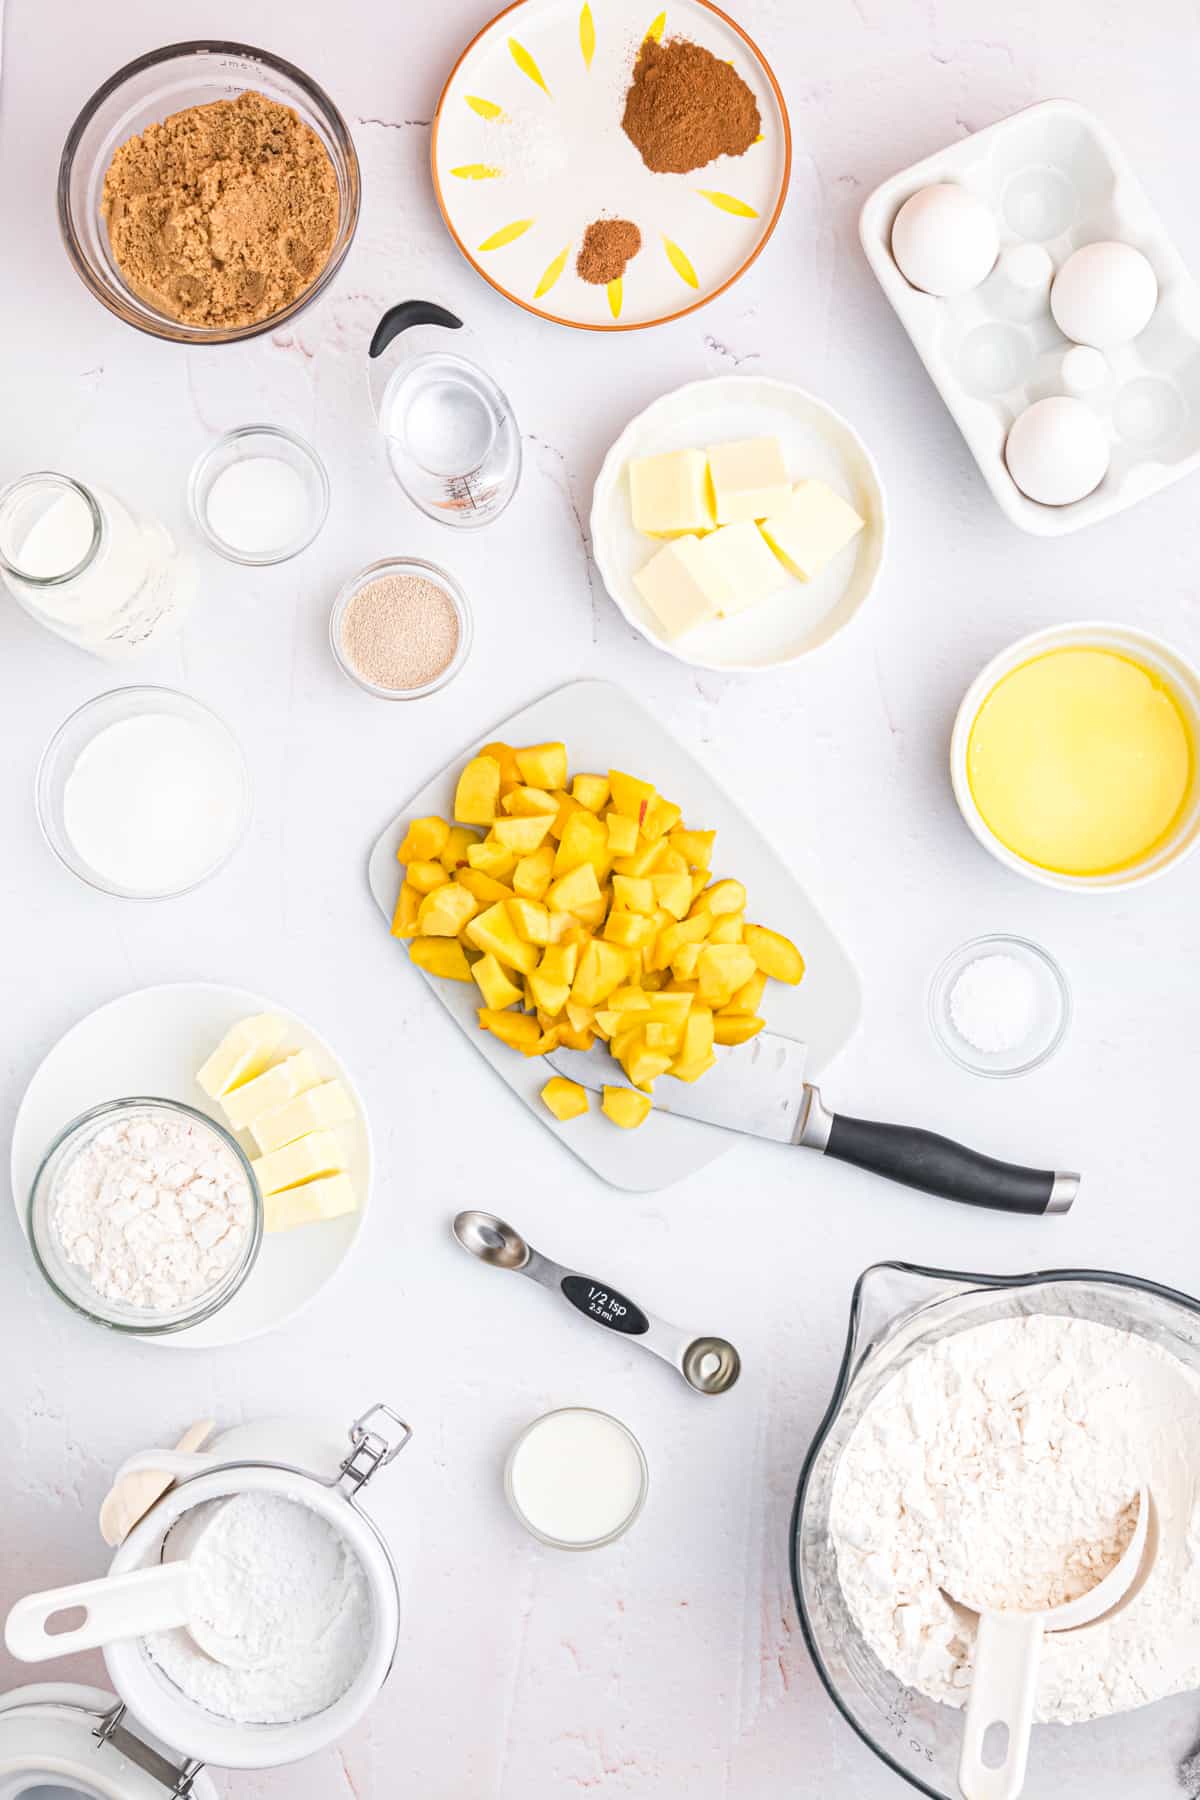 The ingredients for peach cobbler cinnamon rolls are placed on a white surface.